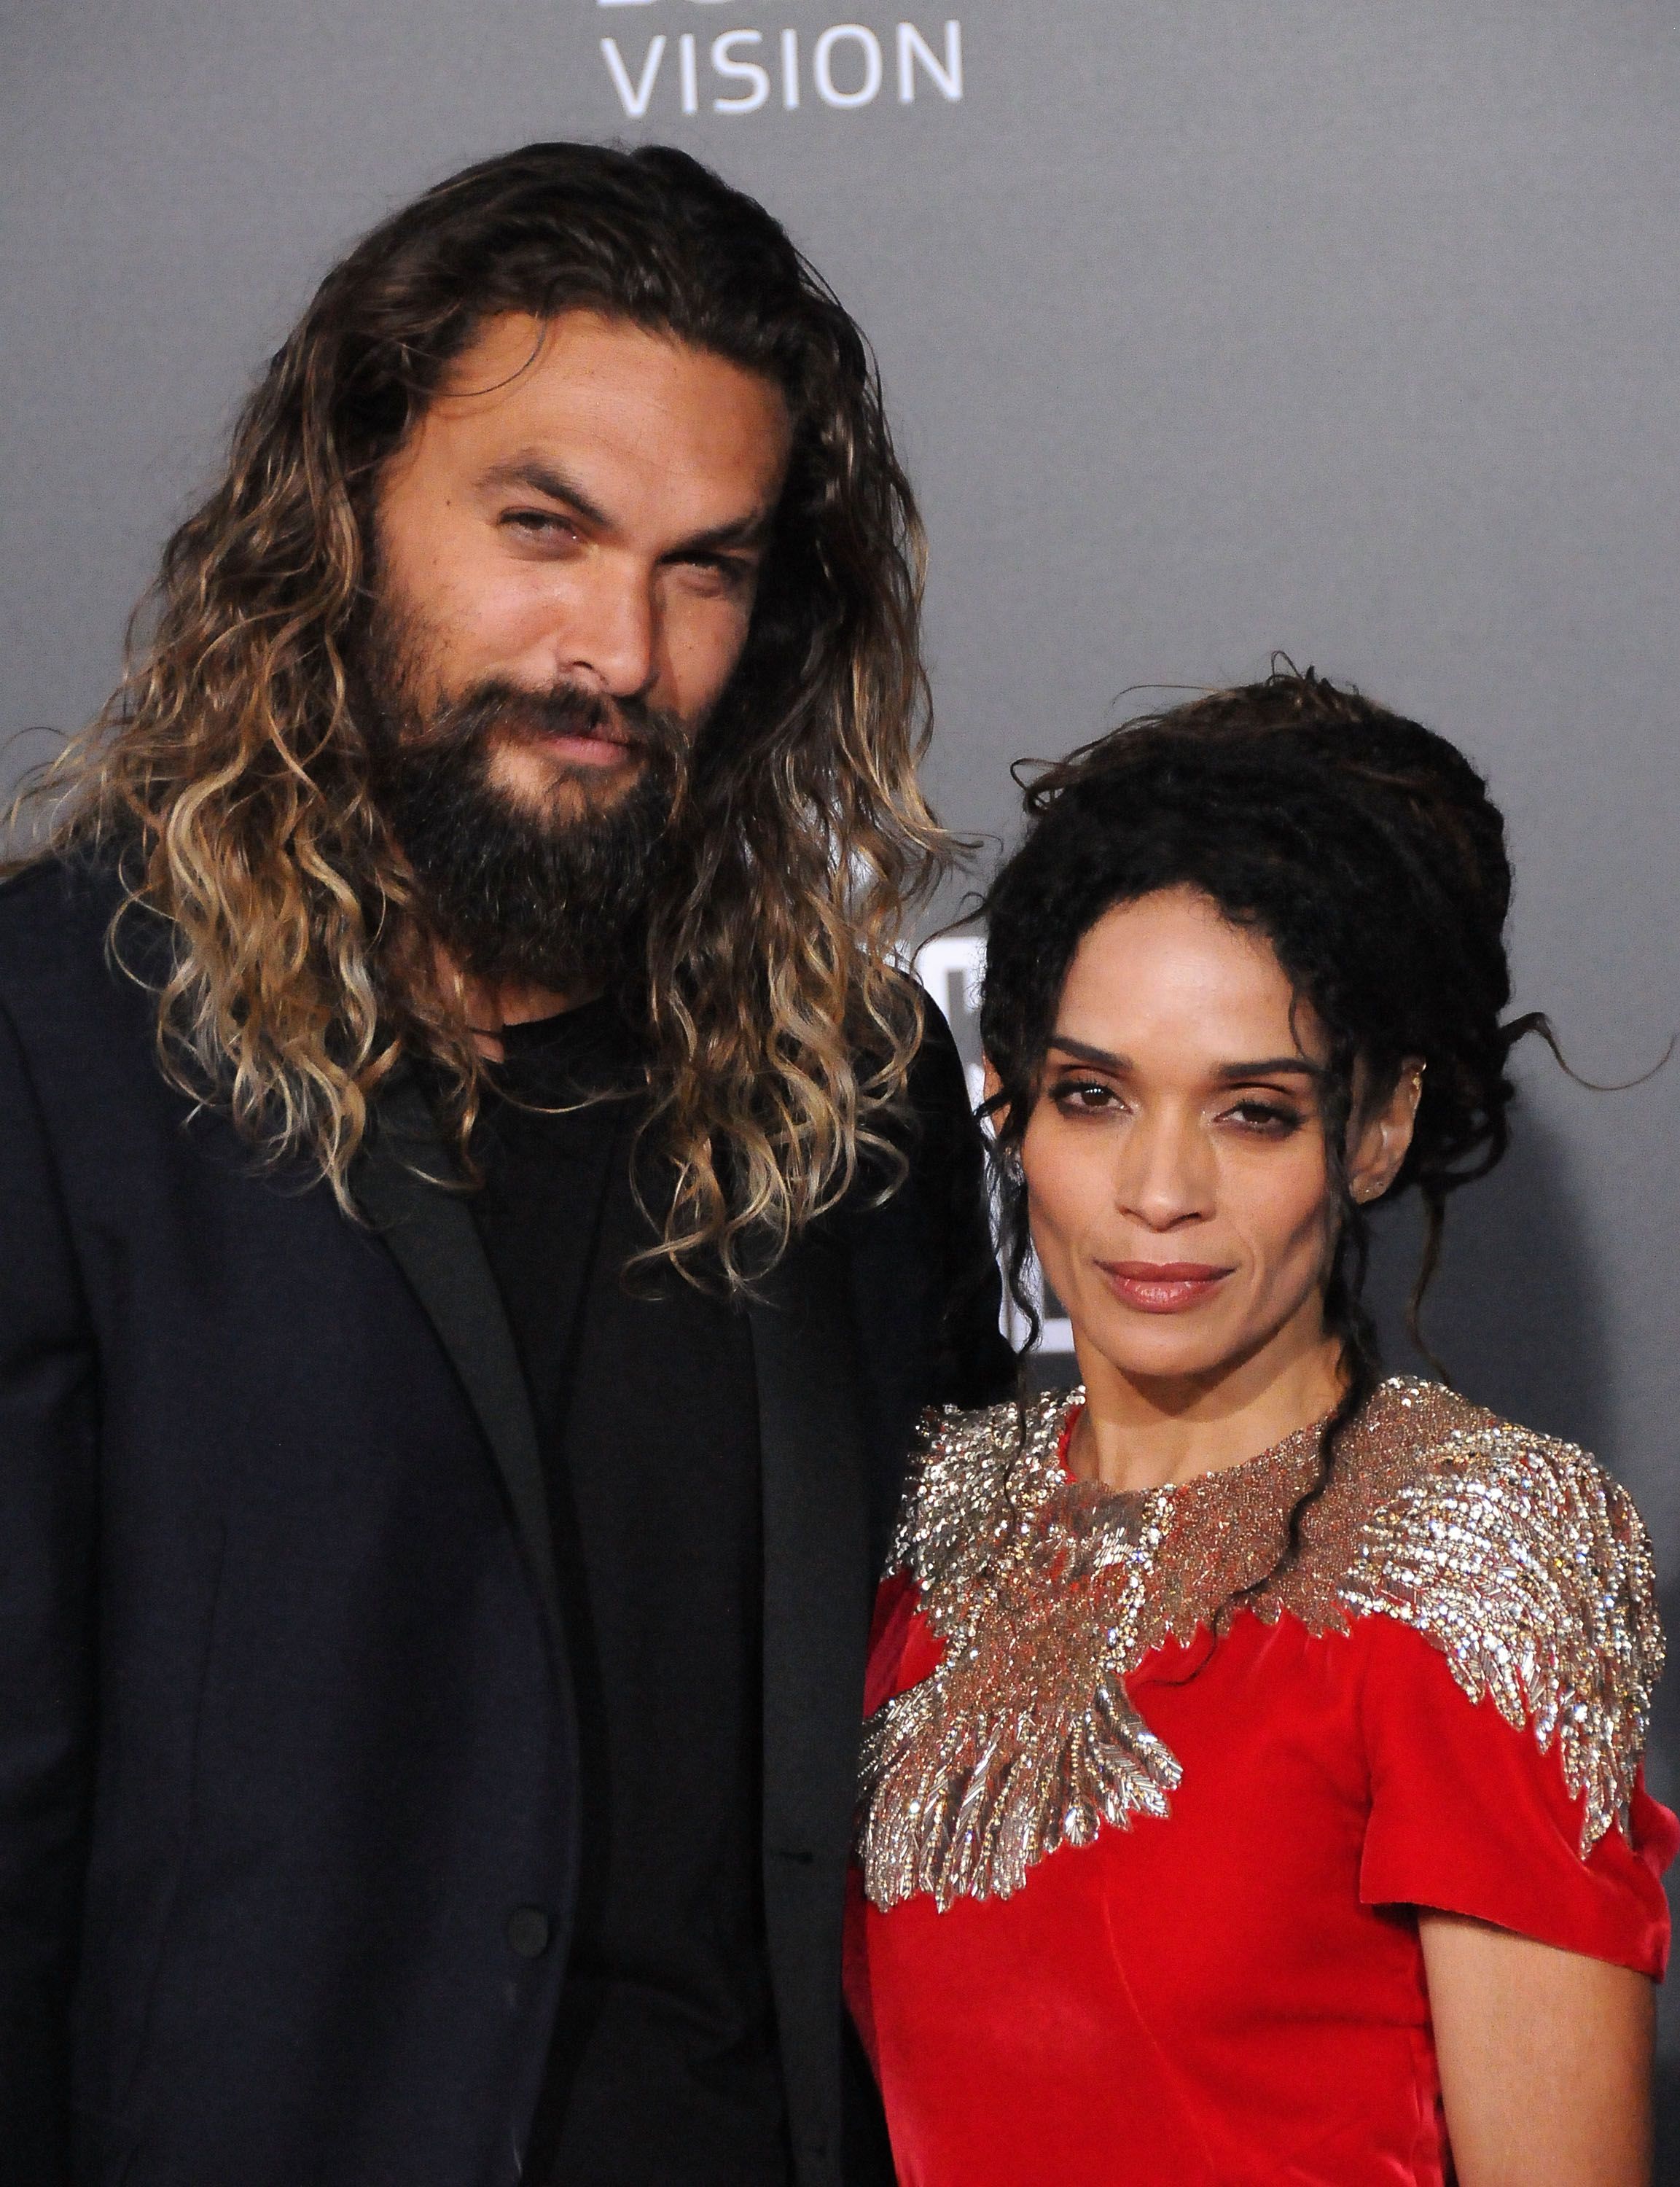 Jason Momoa and Lisa Bonet during the premiere of "Justice League" at Dolby Theatre on November 13, 2017, in Hollywood, California. | Source: Getty Images